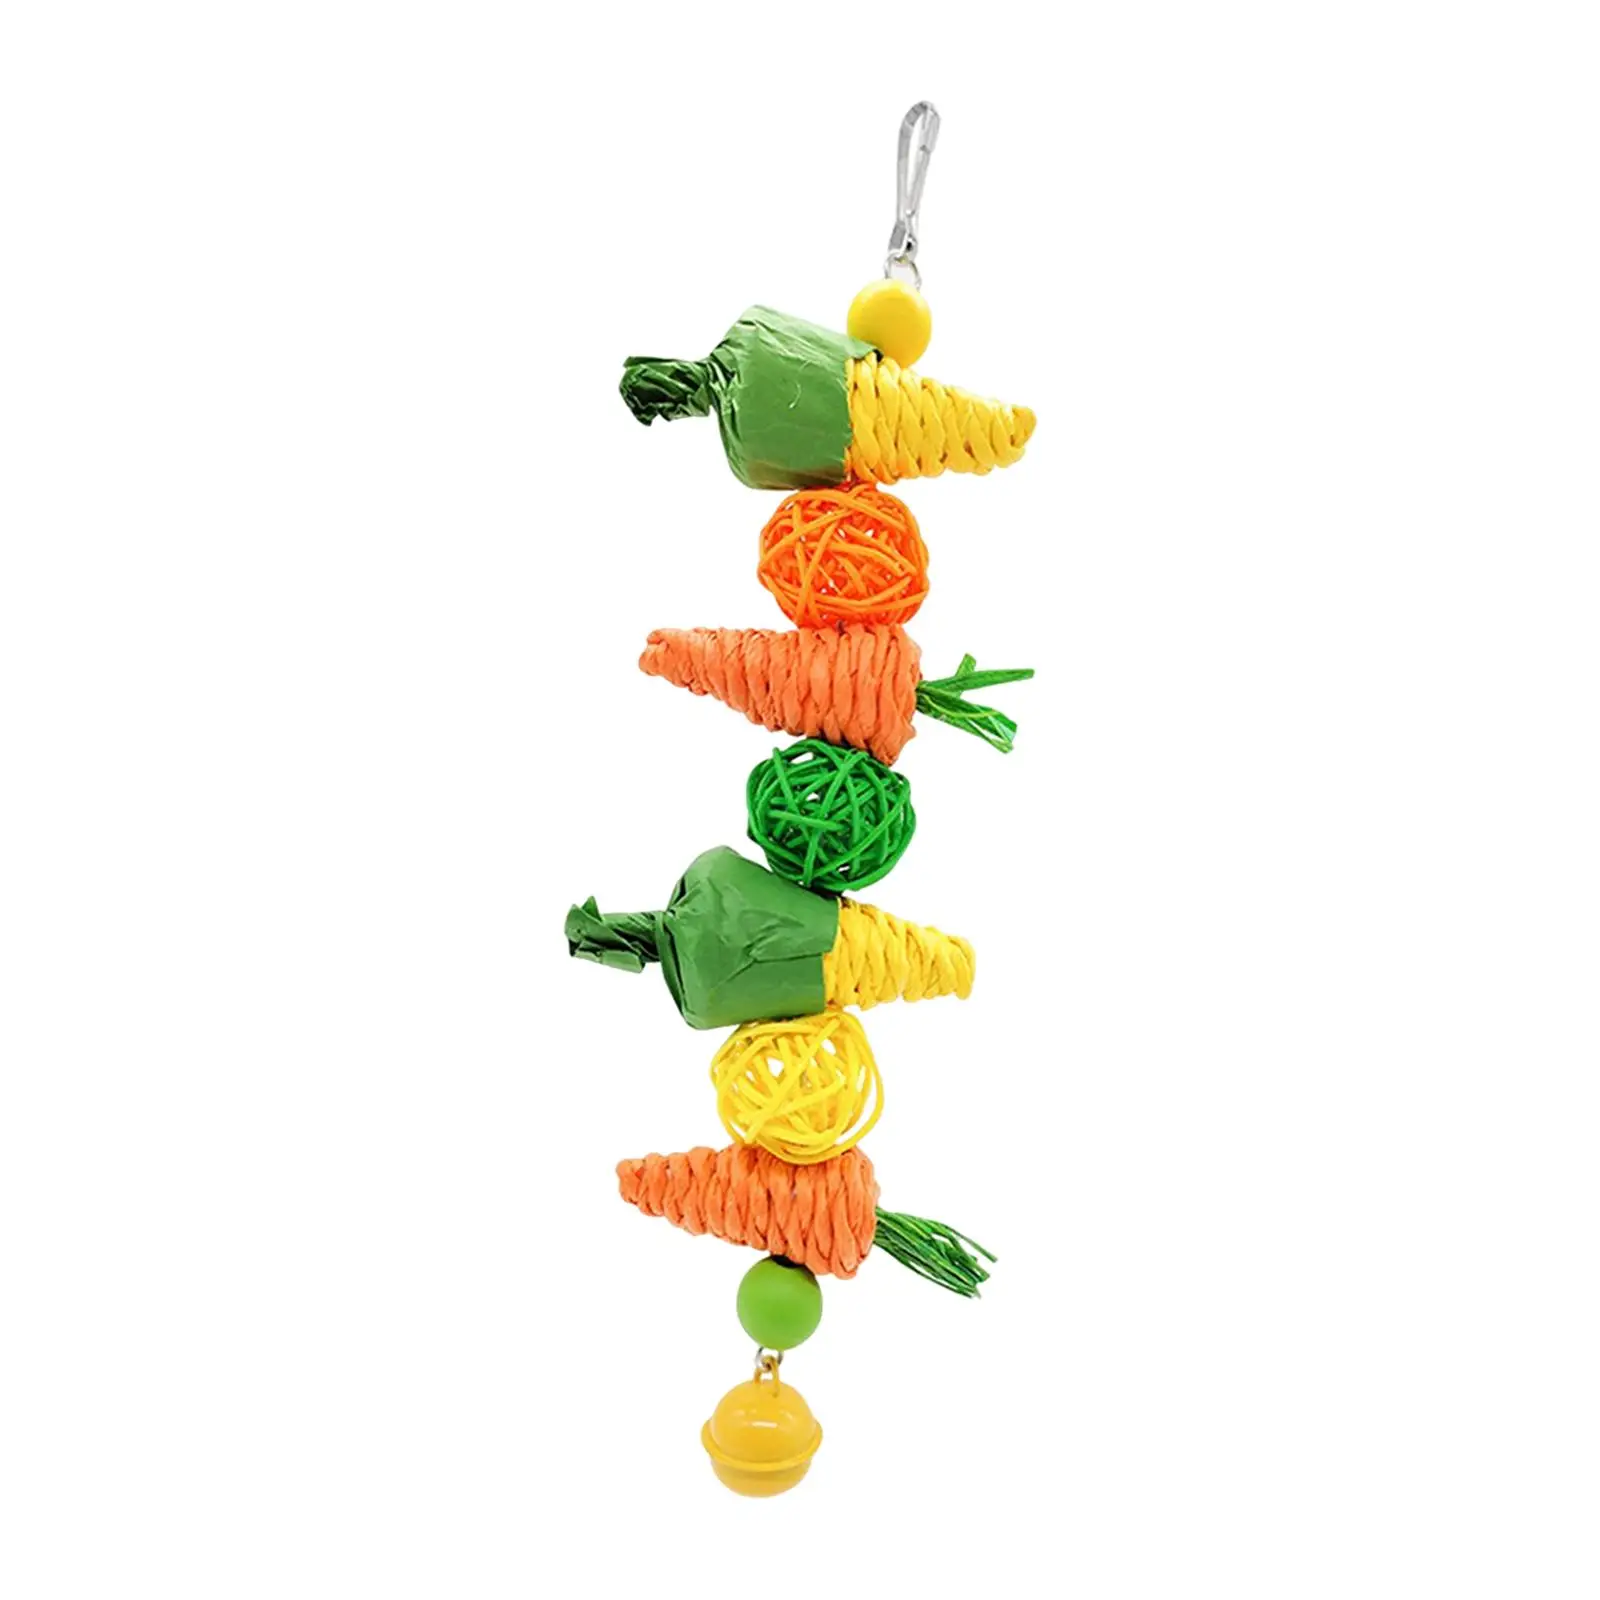 Bird Chewing Toy Cage bite chews Parrot Toys for Macaws Lovebird Budgies